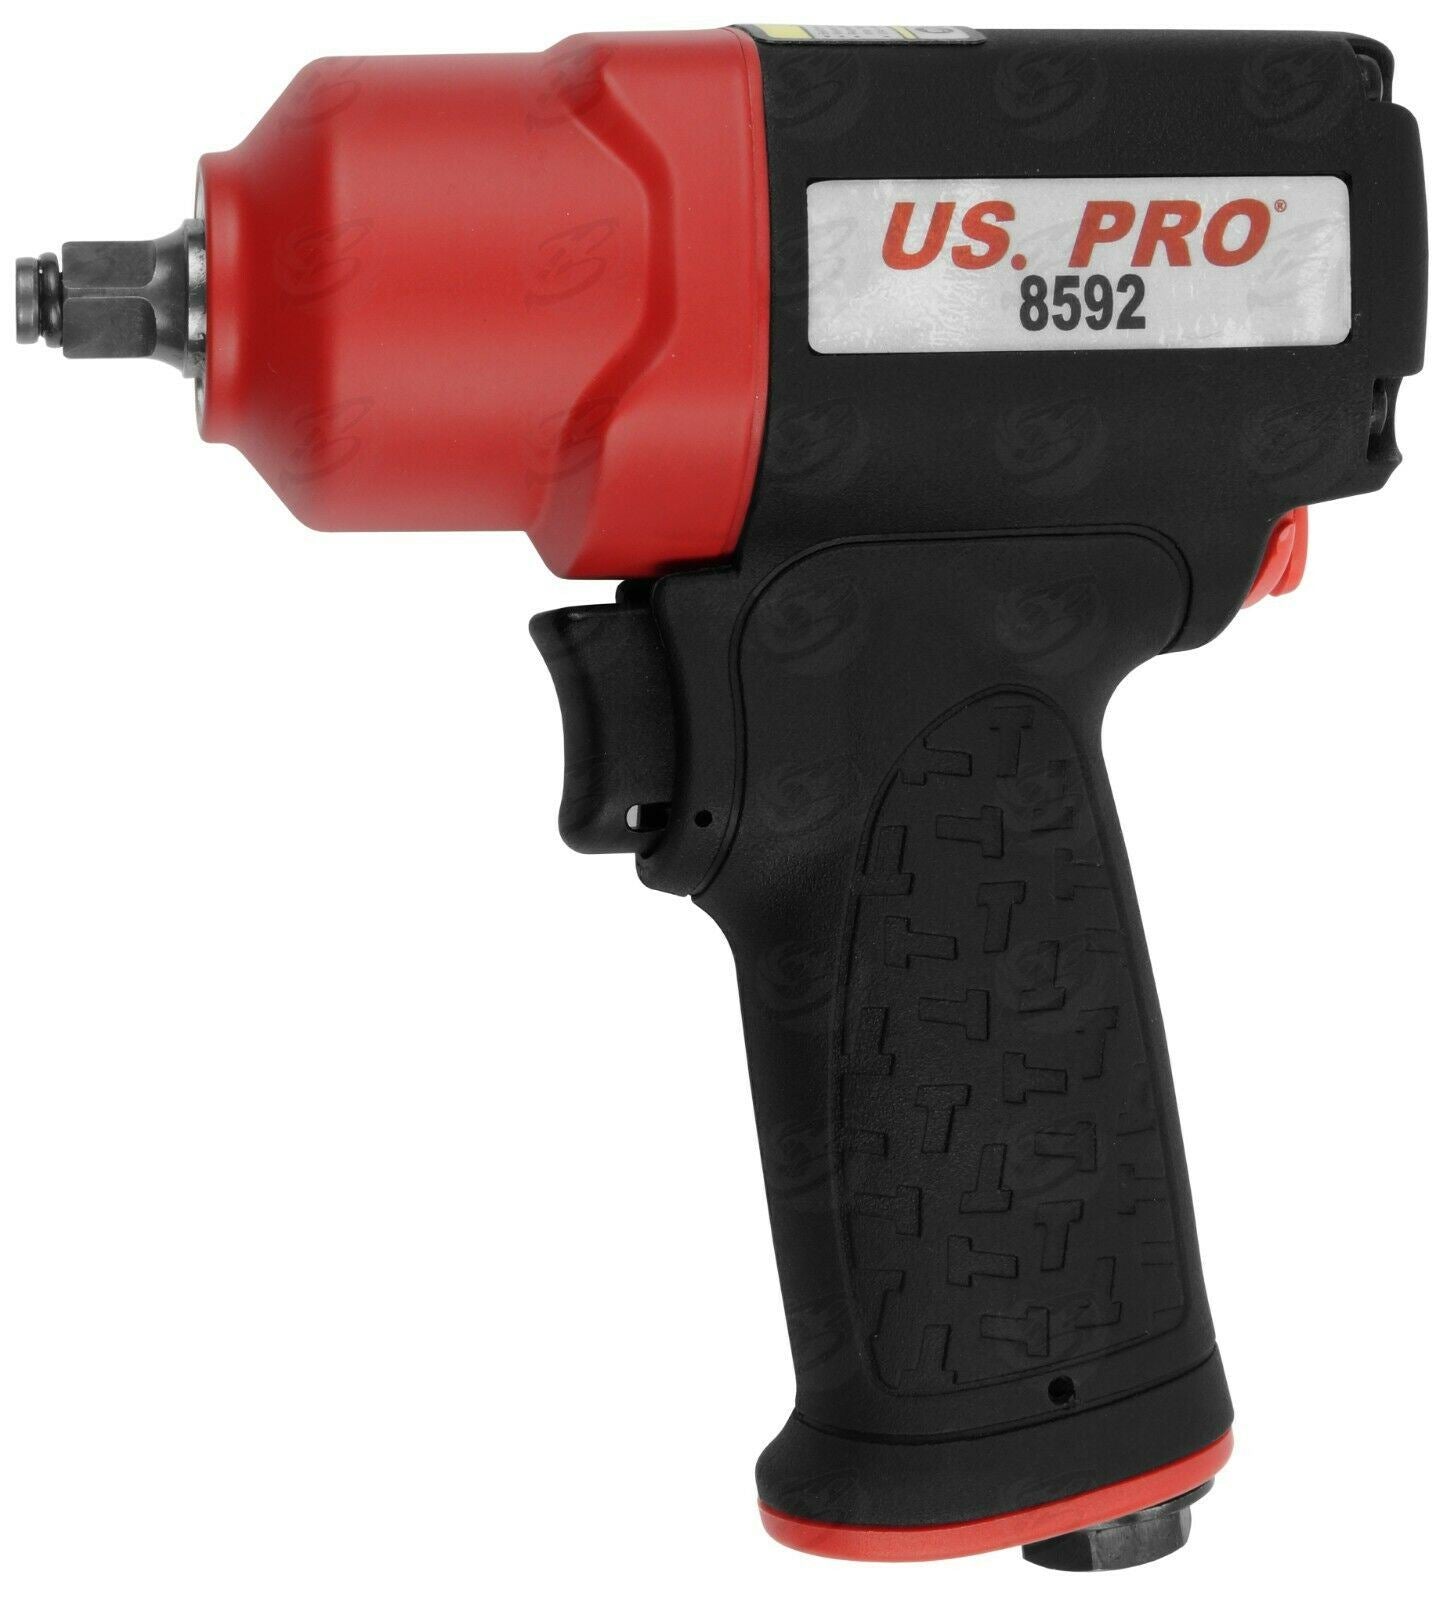 US PRO 3/8" DRIVE COMPOSITE AIR IMPACT WRENCH 536Nm